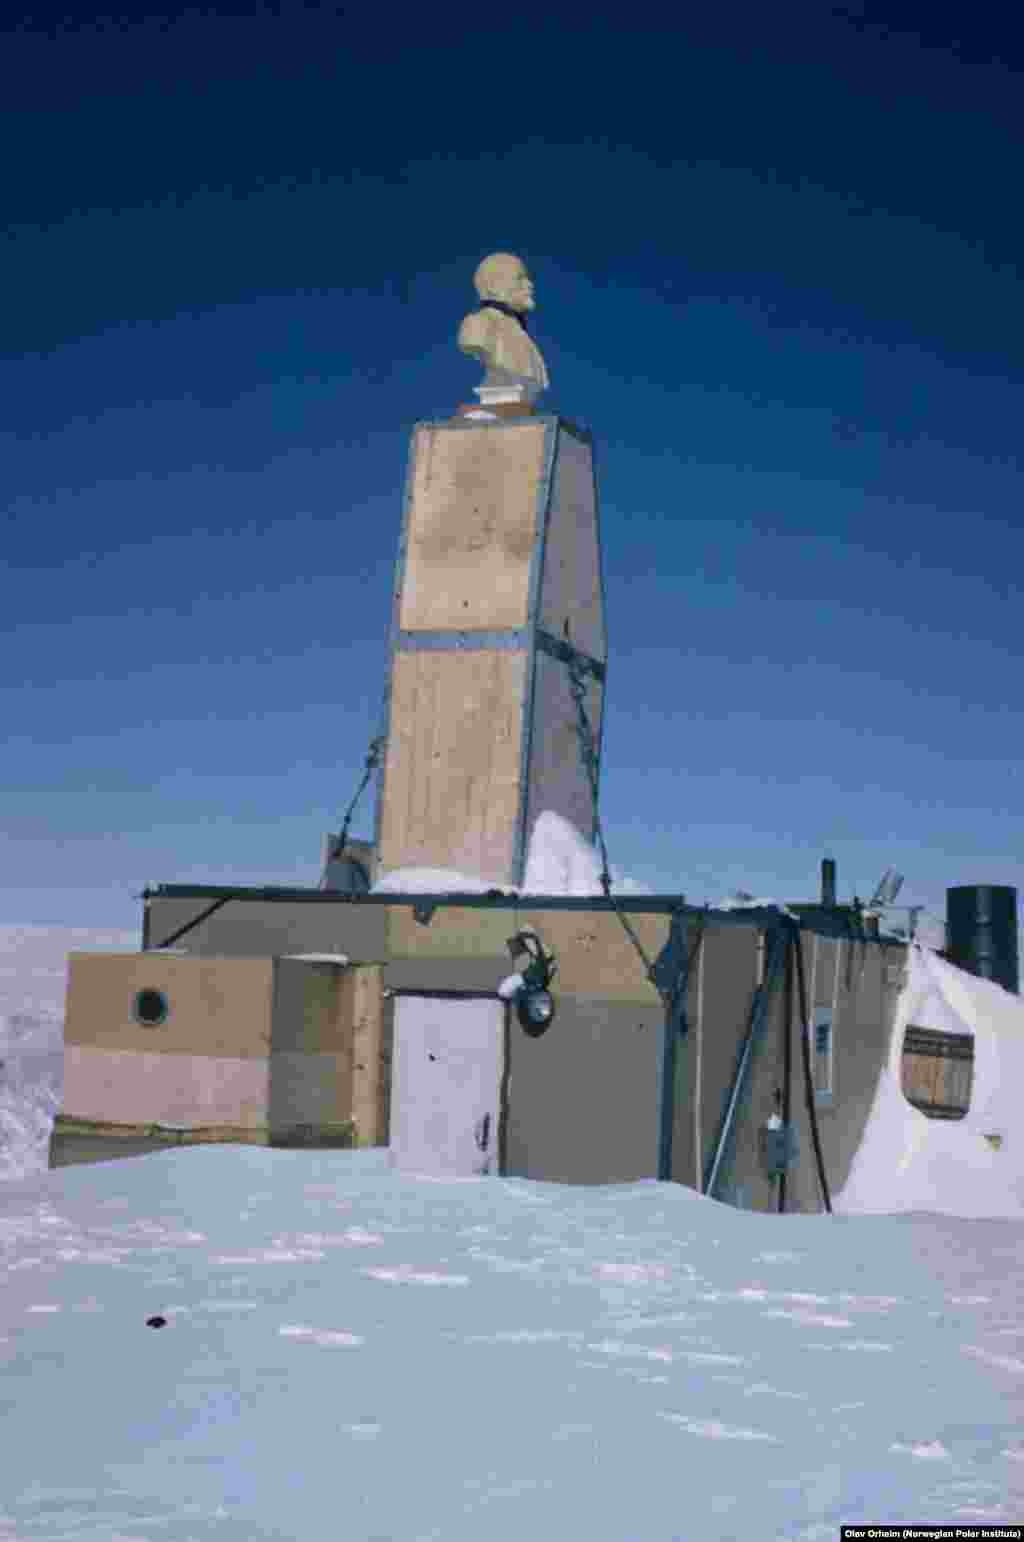 The next photos of the lonely Lenin are from the 1960s. The temporary station is already about half-buried in snow, but Lenin still looms large on top of the chimney. Olav Orheim from the Norwegian Polar Institute took this photo while participating in the second stage of the American expedition called the Queen Maud Land Traverse (1964-1967).